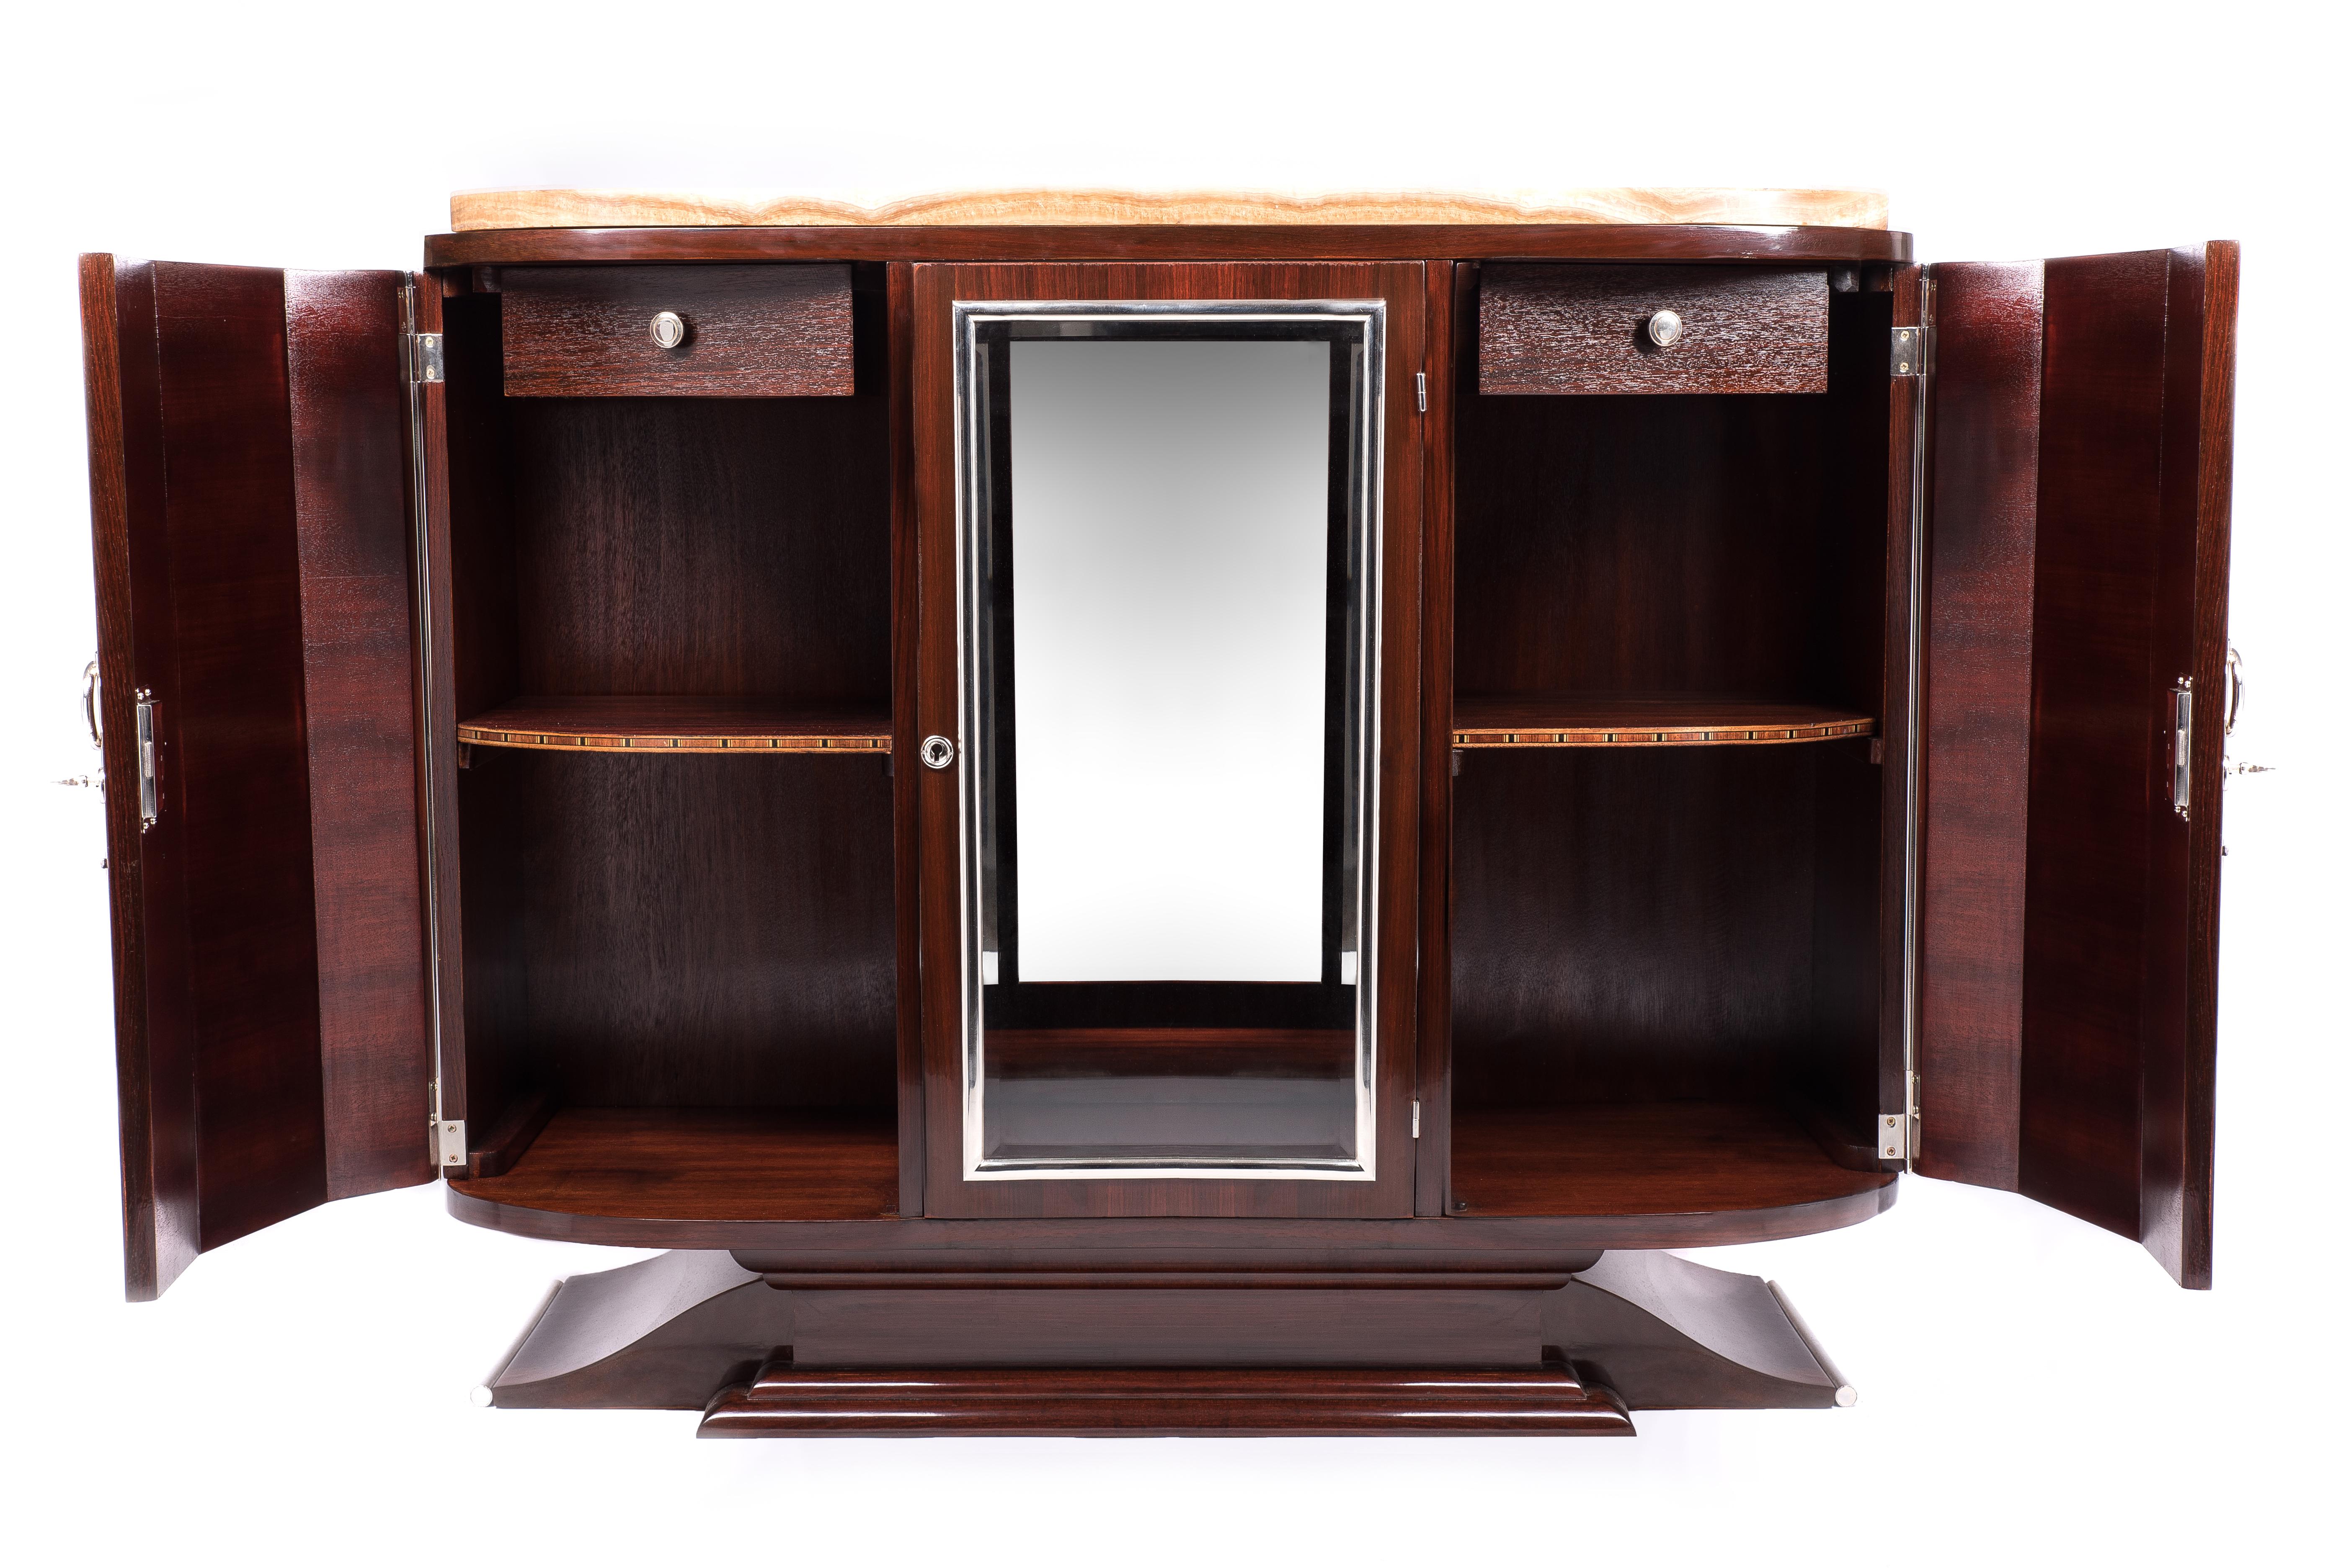 Fantastic original French Art Deco sideboard made for quality living rooms and interiors. Fully refurbished, with high gloss varnished mahogany veneer, metal parts reconditioned, marble slab polished. The 3-door sideboard has a middle glass door